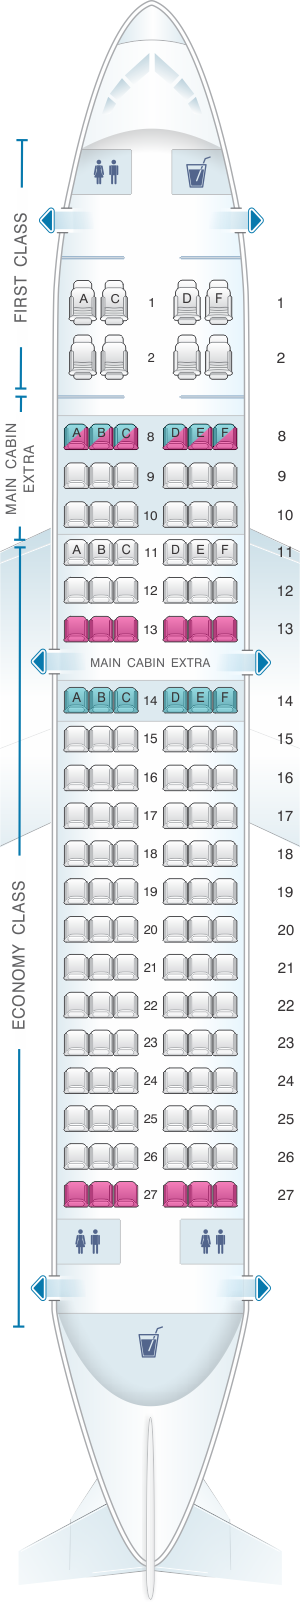 Seat Map American Airlines Airbus A319 | SeatMaestro